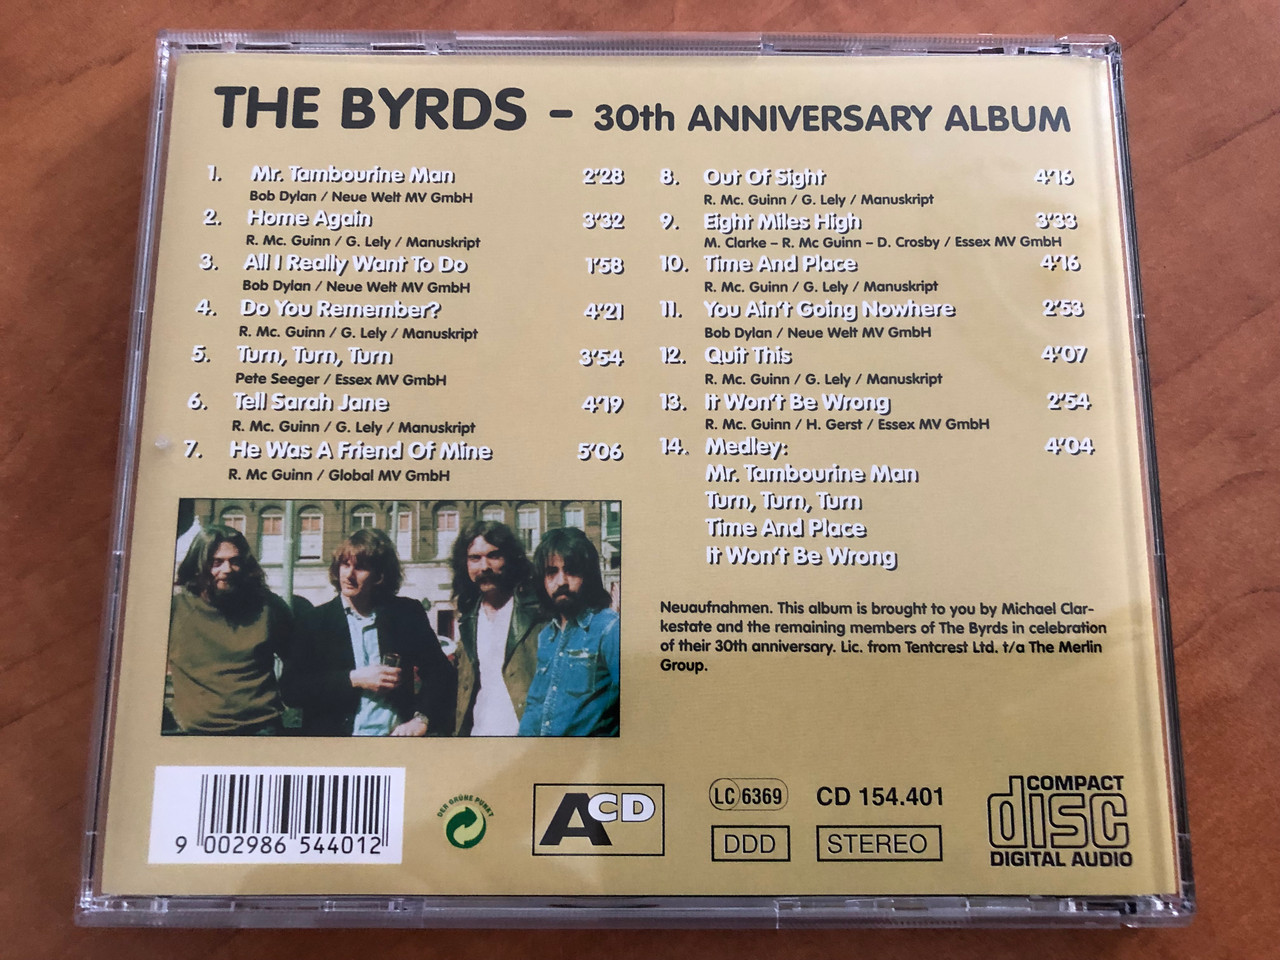 https://cdn10.bigcommerce.com/s-62bdpkt7pb/products/30800/images/181838/The_Byrds_30th_Anniversary_Album_ACD_Audio_CD_Stereo_CD_154.401_4__12645.1623932953.1280.1280.JPG?c=2